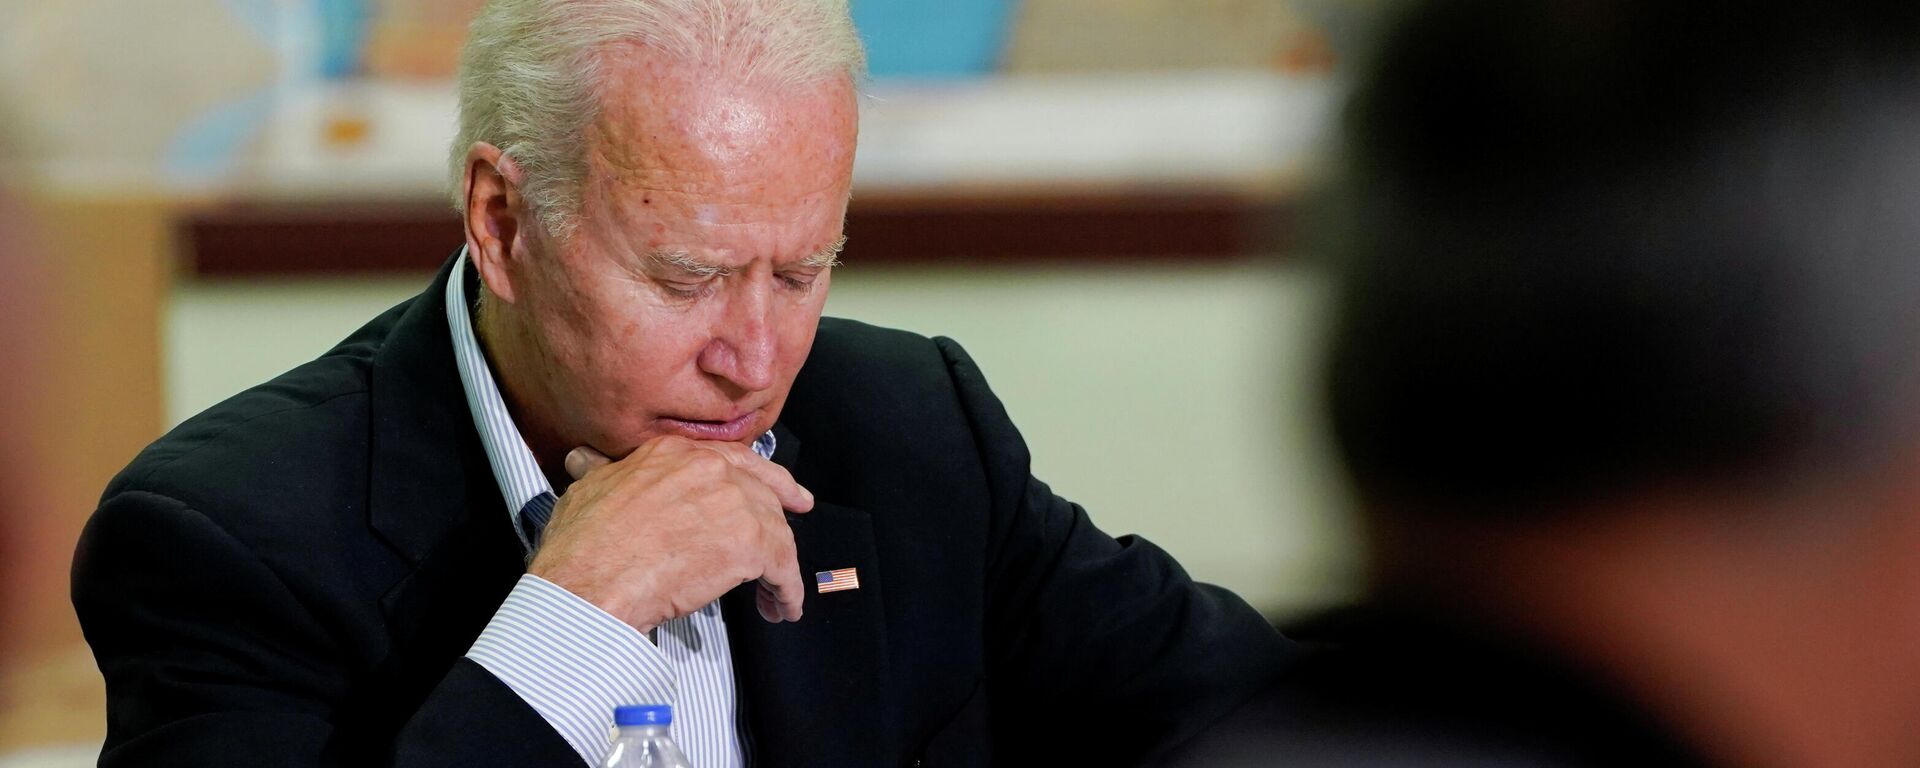 U.S. President Joe Biden looks down during a briefing by local leaders on the impact of the remnants of Tropical Storm Ida at Somerset County Emergency Management Training Center in Hillsborough Township, New Jersey, U.S., September 7, 2021 - Sputnik International, 1920, 08.09.2021